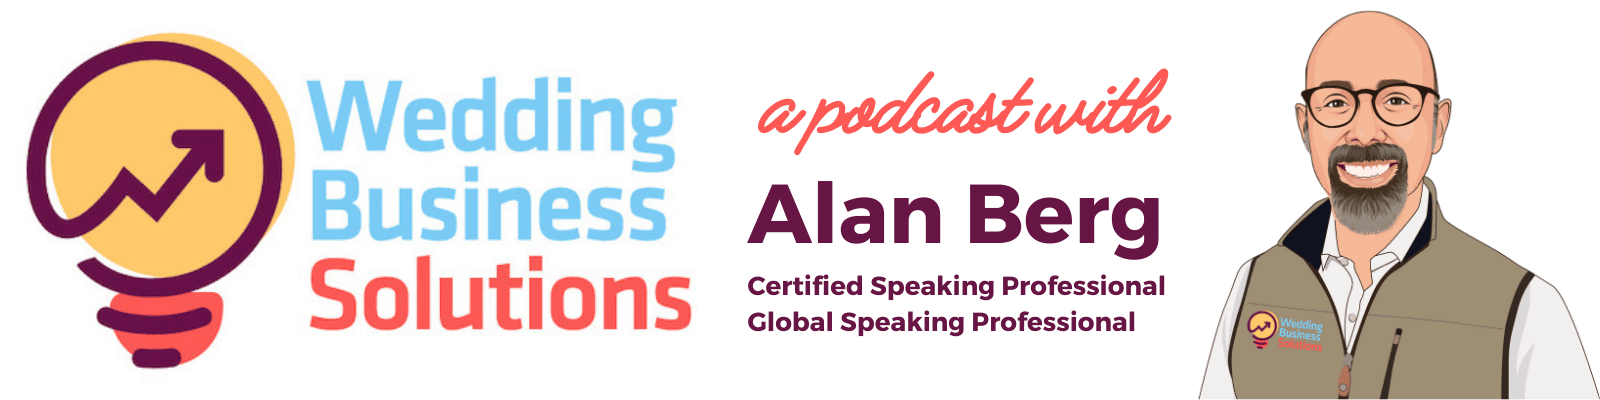 Wedding Business Solutions Podcast with Alan Berg CSP, Global Speaking Fellow